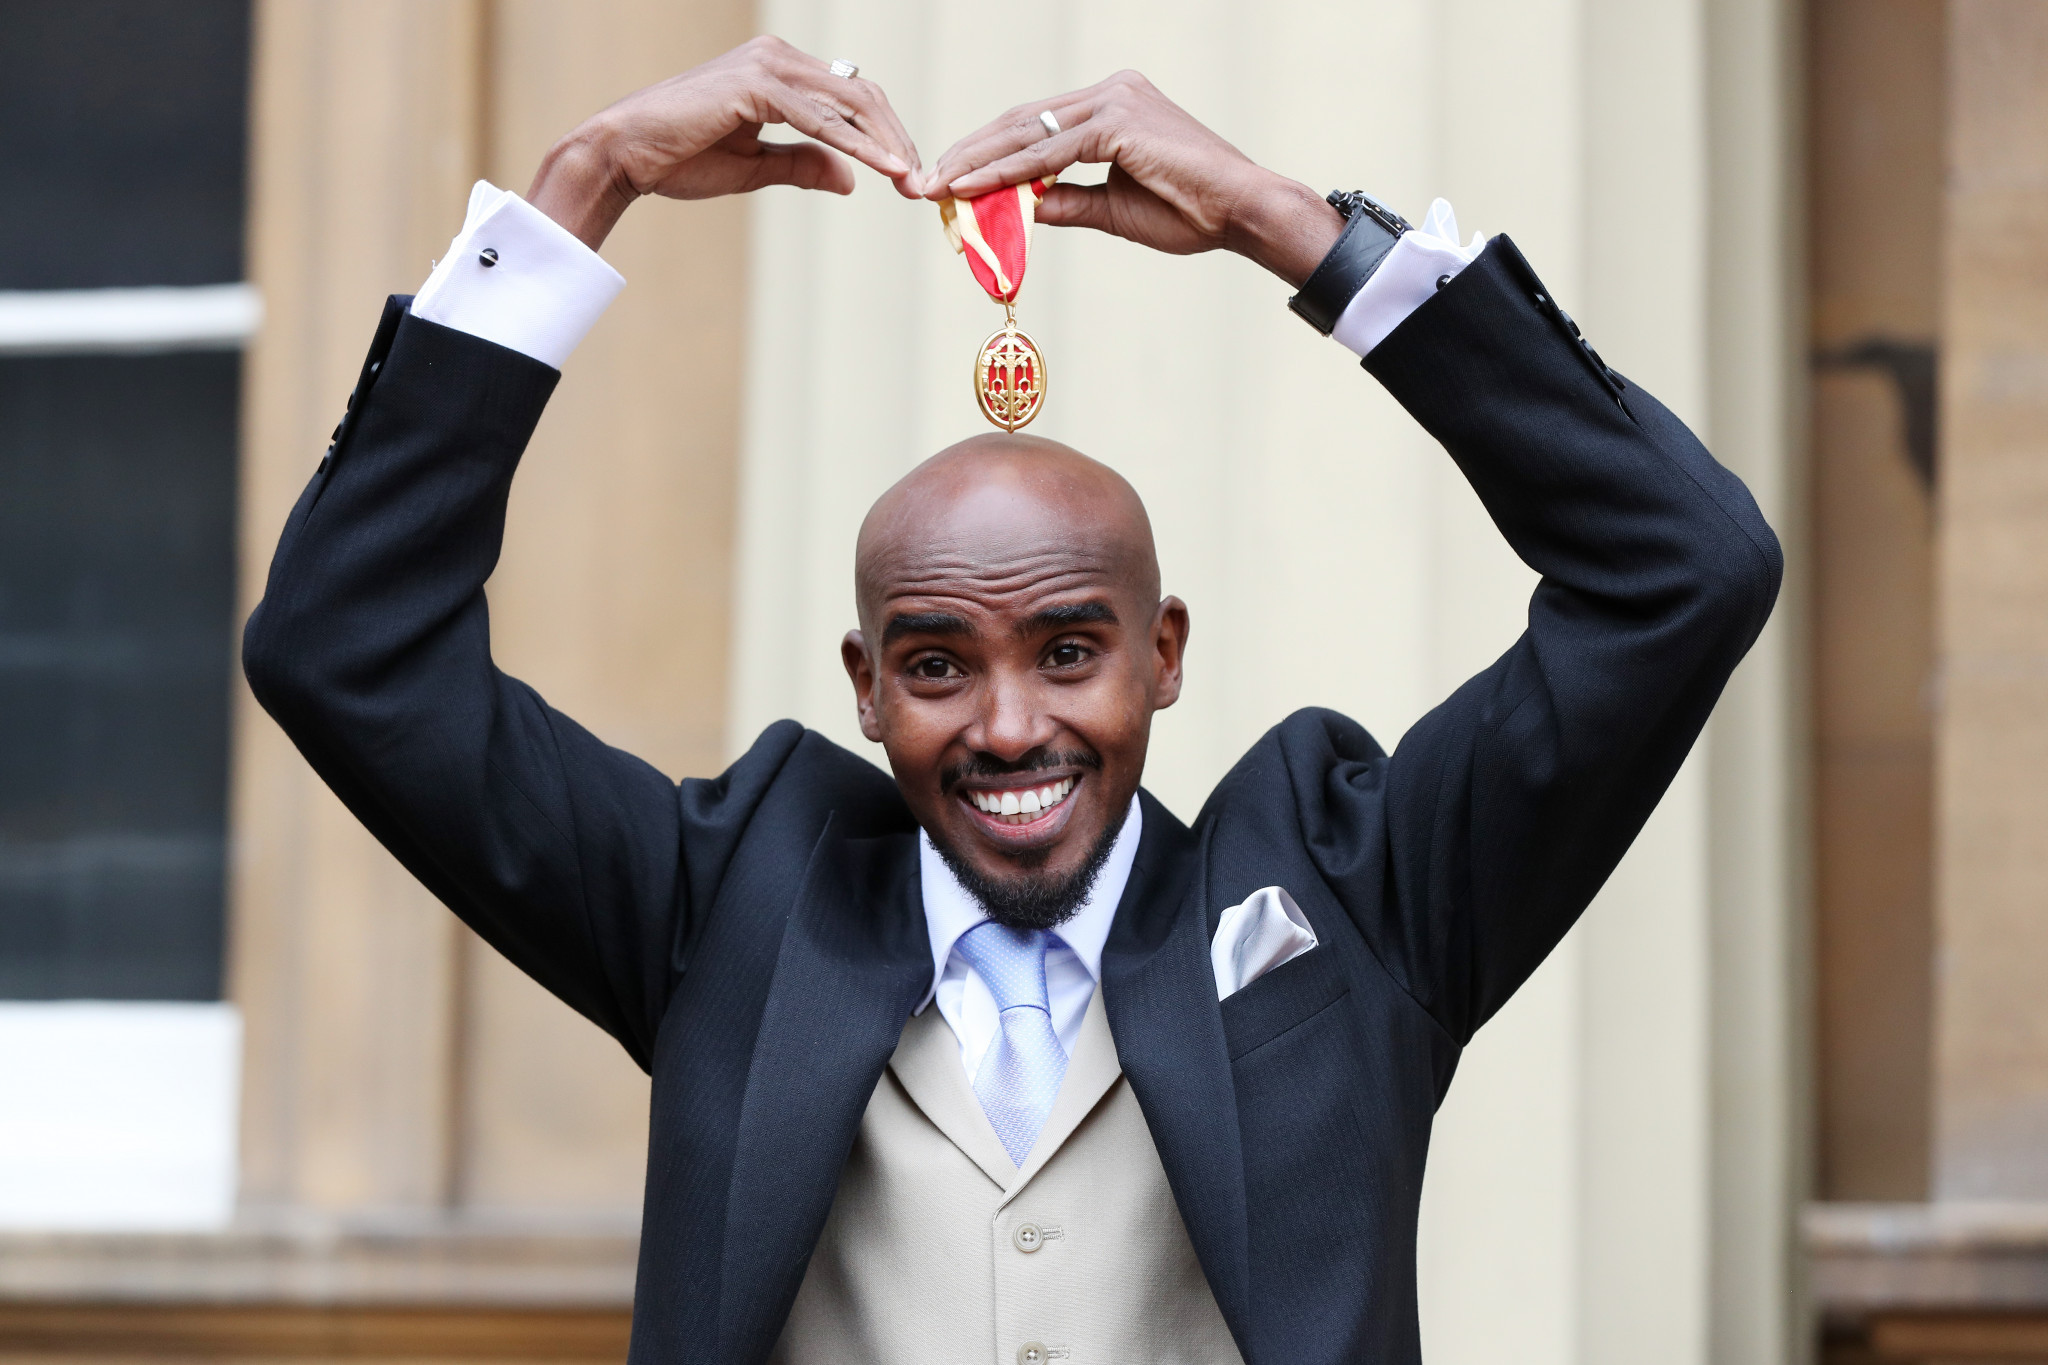 Four-time Olympic champion Sir Mo Farah has had better years but nevertheless, here he does his trademark 'mobot' after receiving his knighthood from Queen Elizabeth II at Buckingham Palace last month ©Getty Images